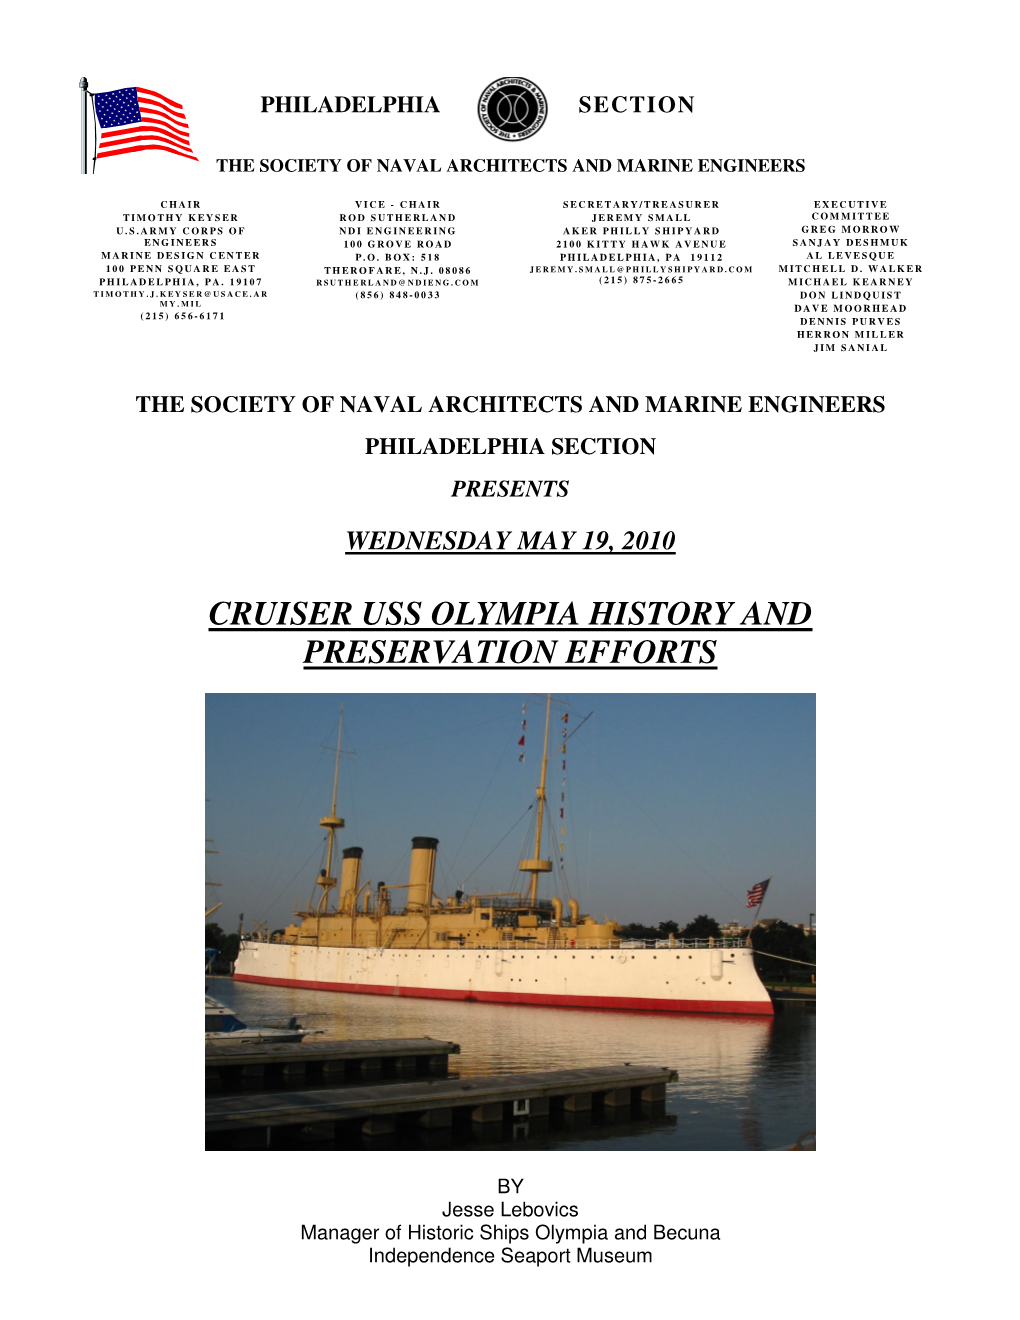 Cruiser Uss Olympia History and Preservation Efforts